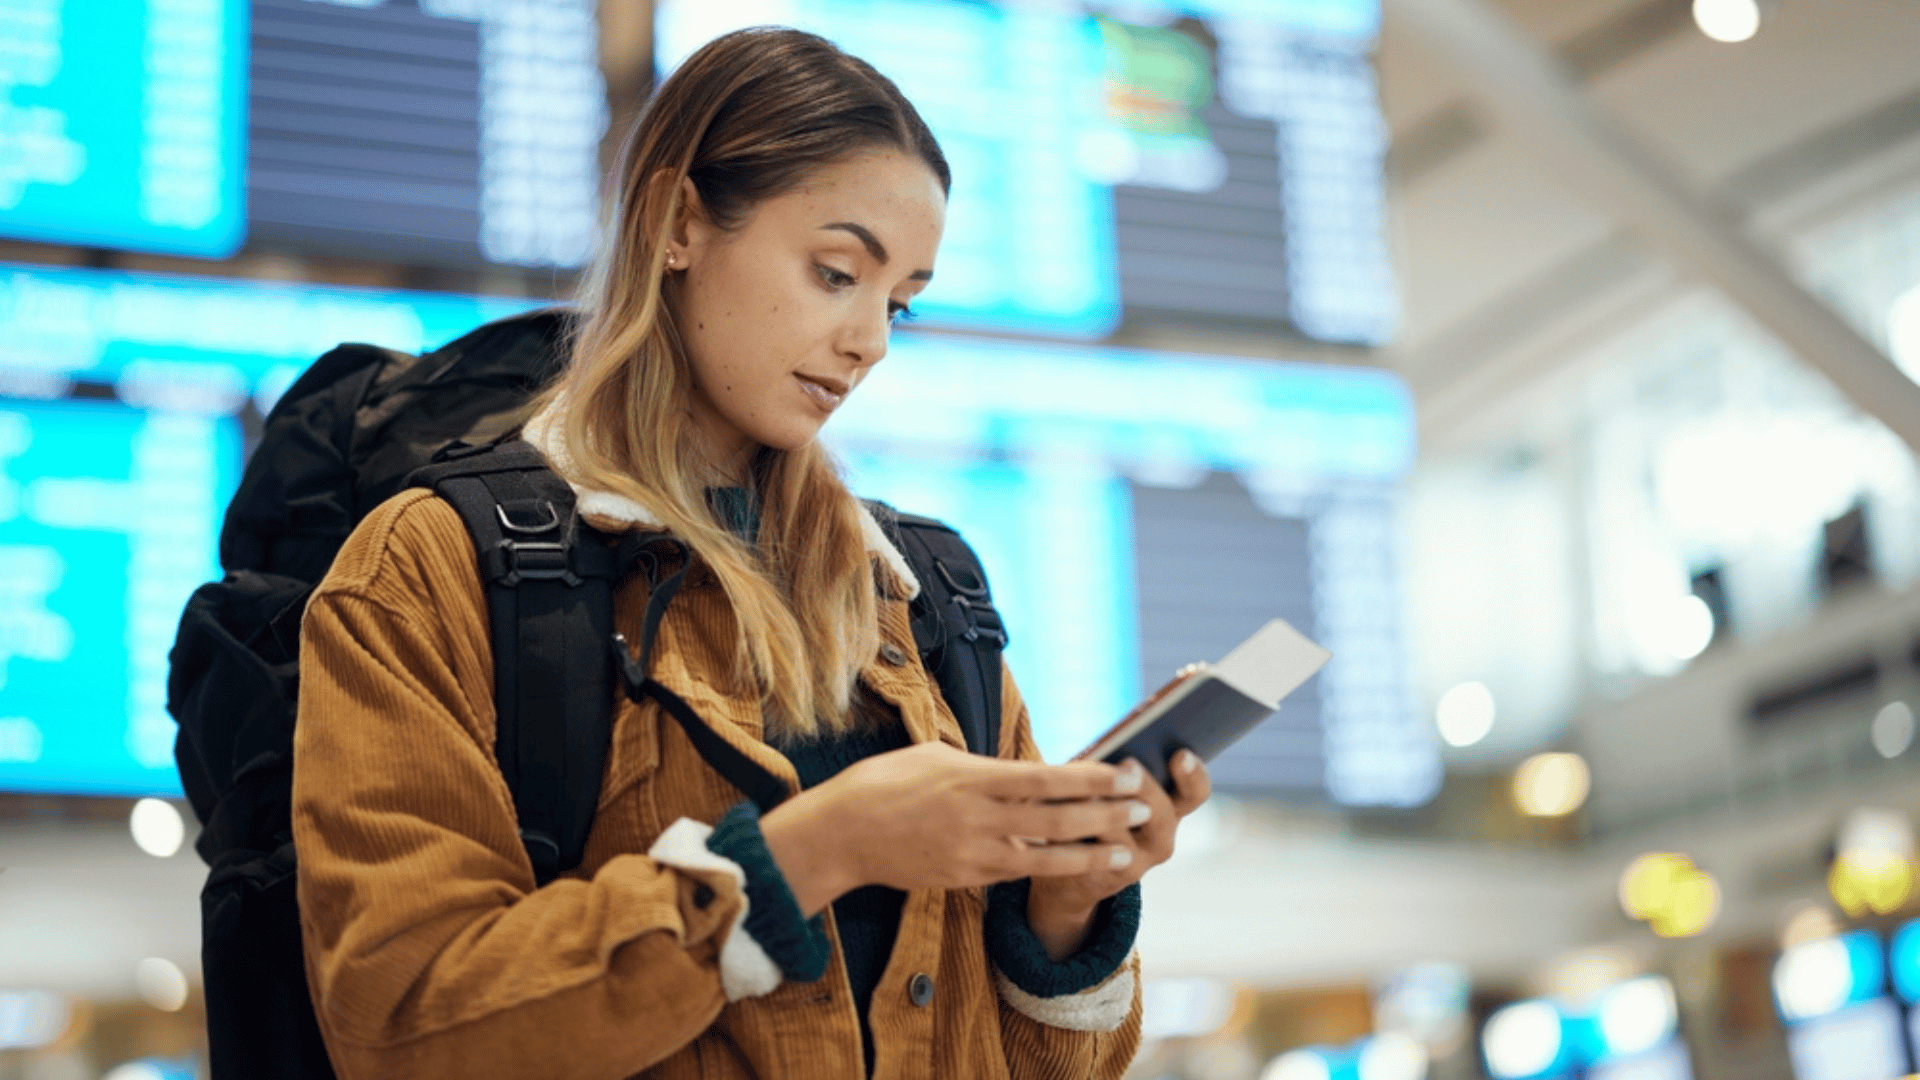 Person In Airport Looking At Digital Passport on Smartphone